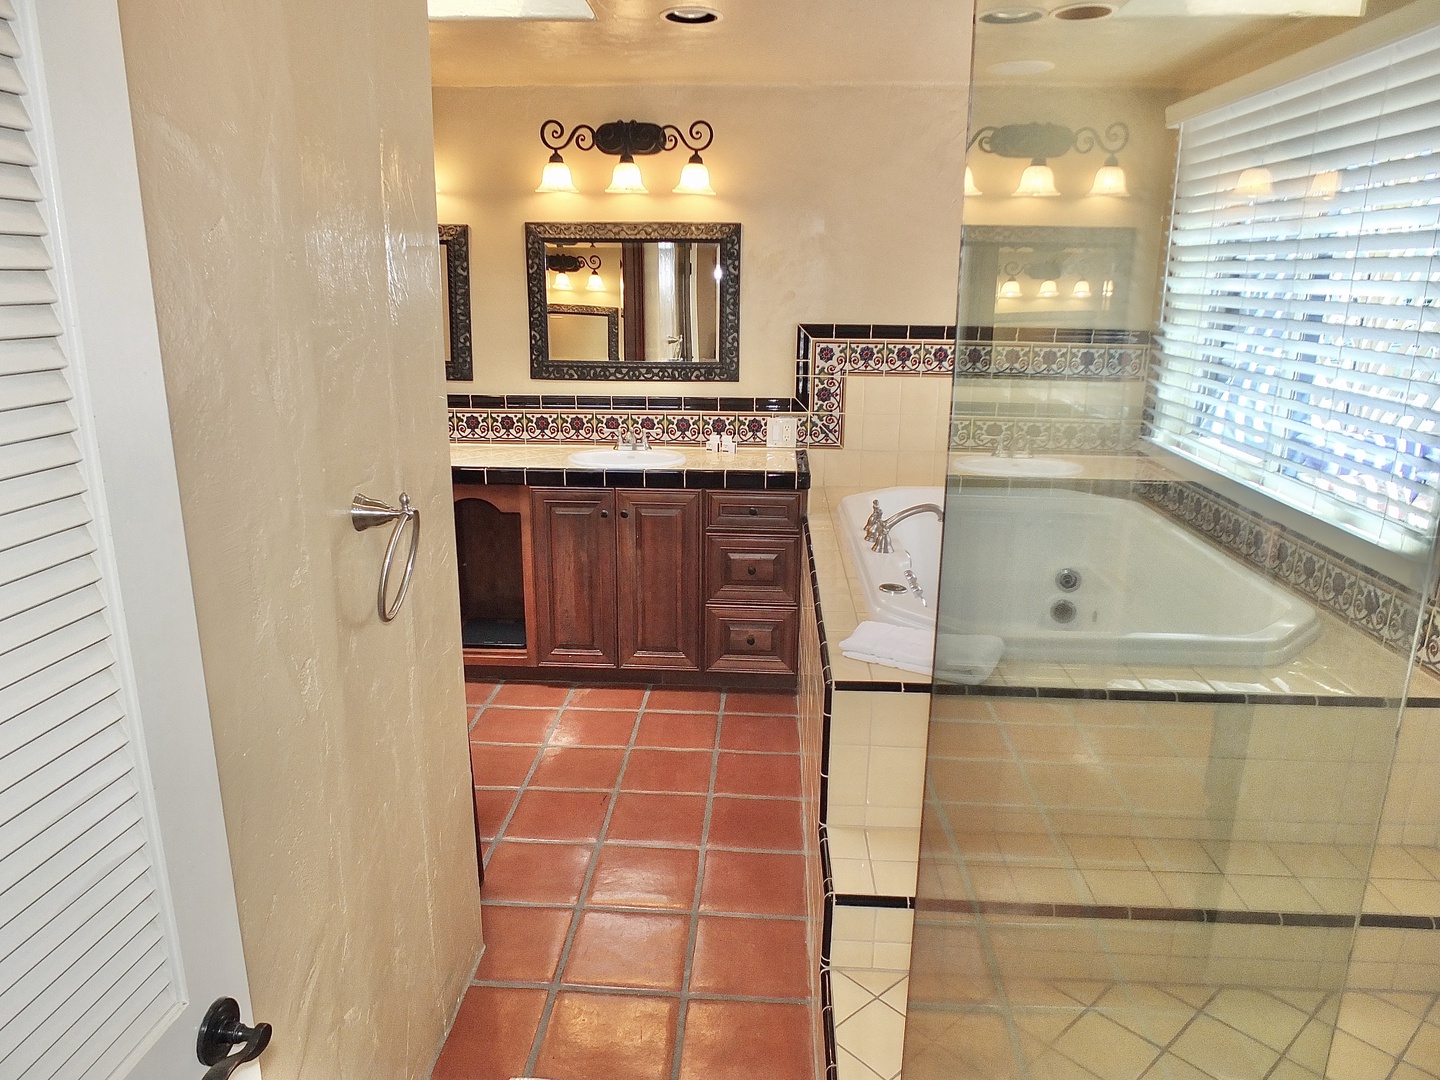 Soak the day away in the 2nd floor king en suite, with double vanity, jacuzzi tub, and glass shower